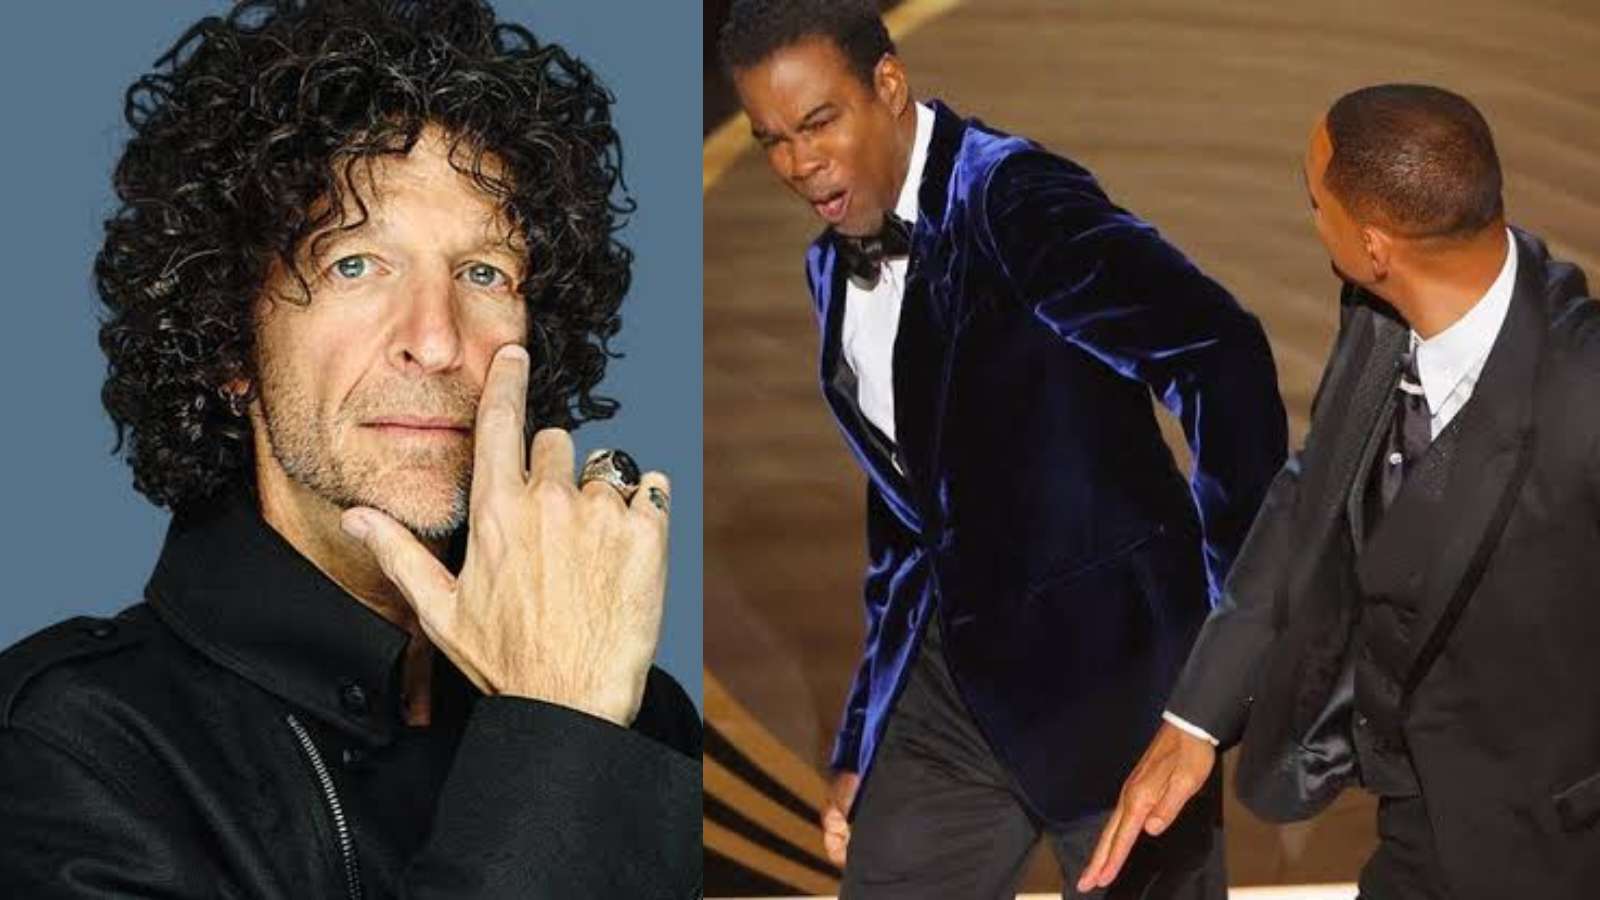 Howard Stern addressed the Will Smith and Chris Rock altercation during Academy Awards